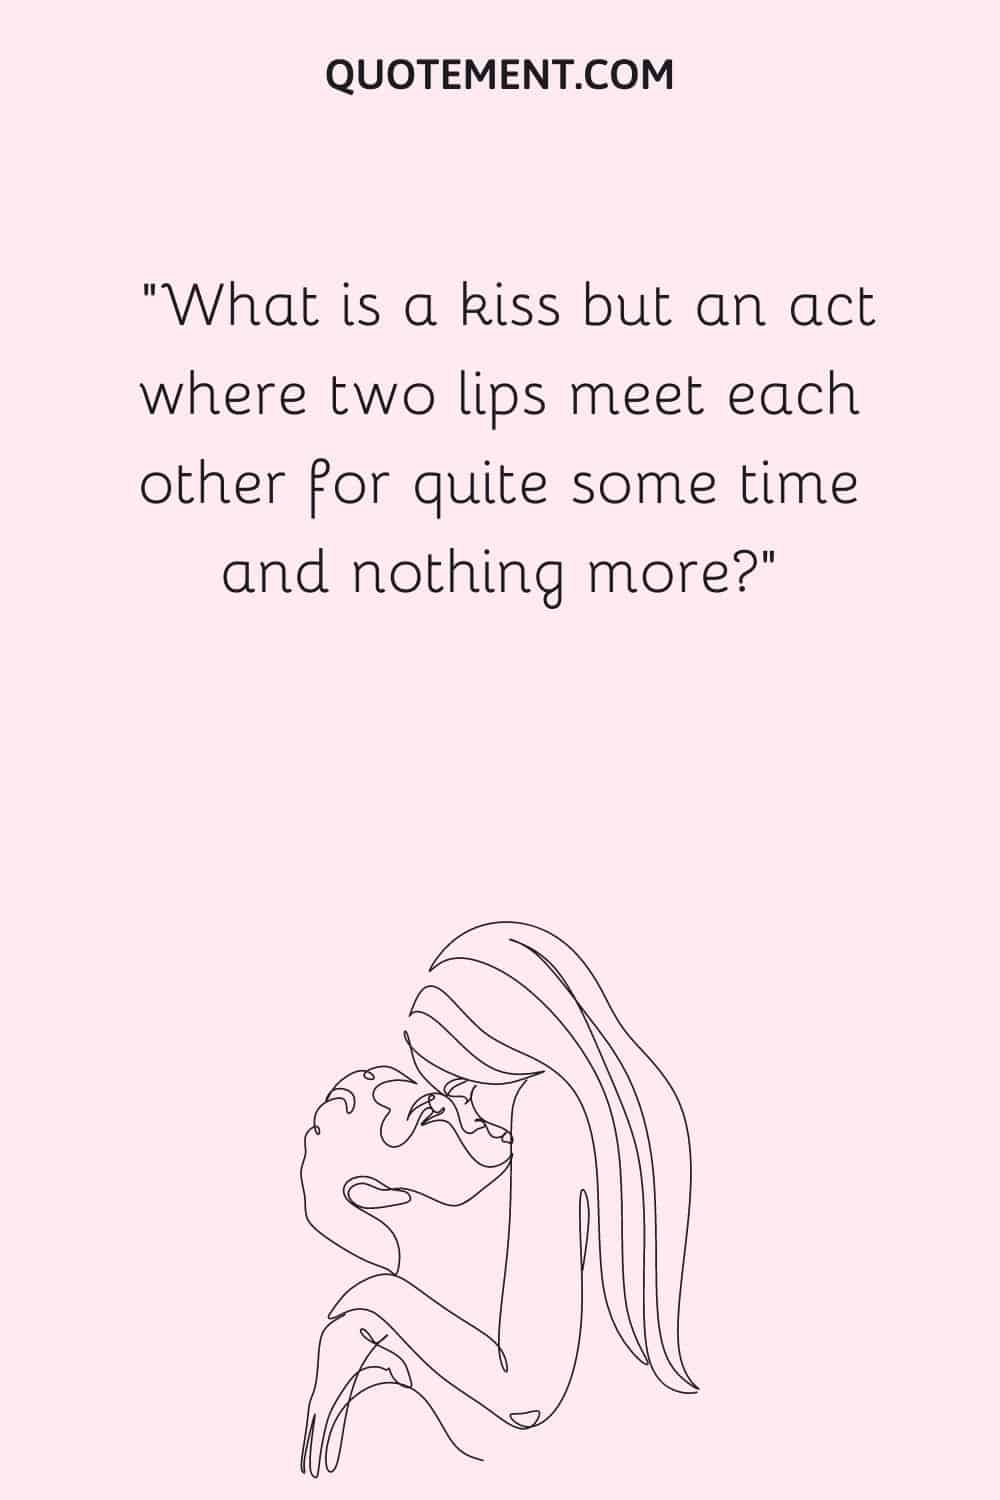 What is a kiss but an act where two lips meet each other for quite some time and nothing more